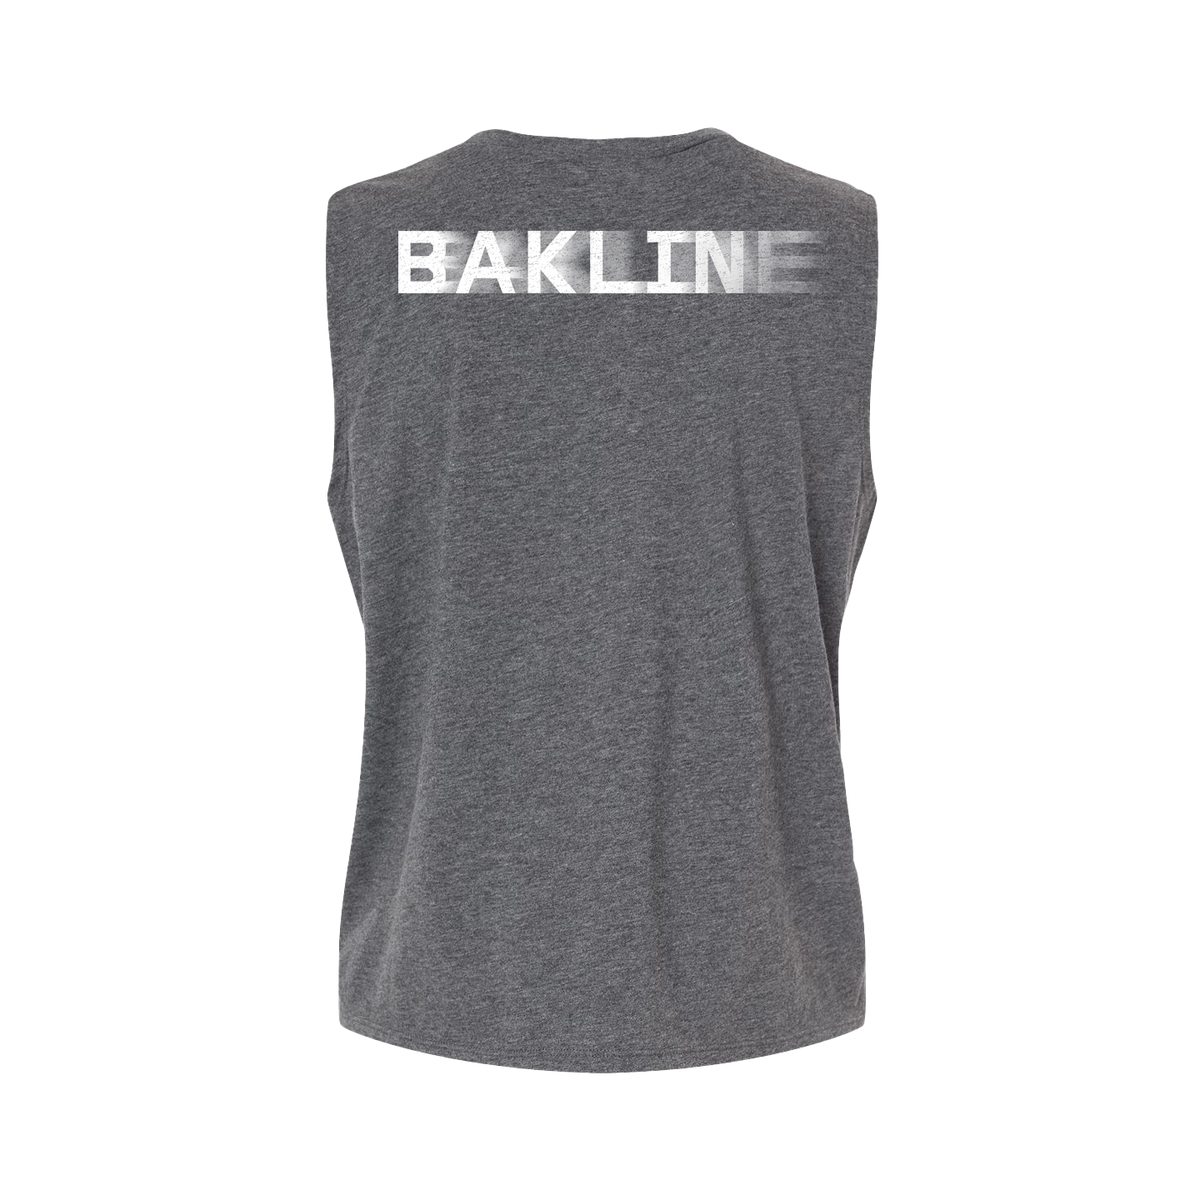 Keep Moving - Short Muscle - Contoured Relaxed - Bakline